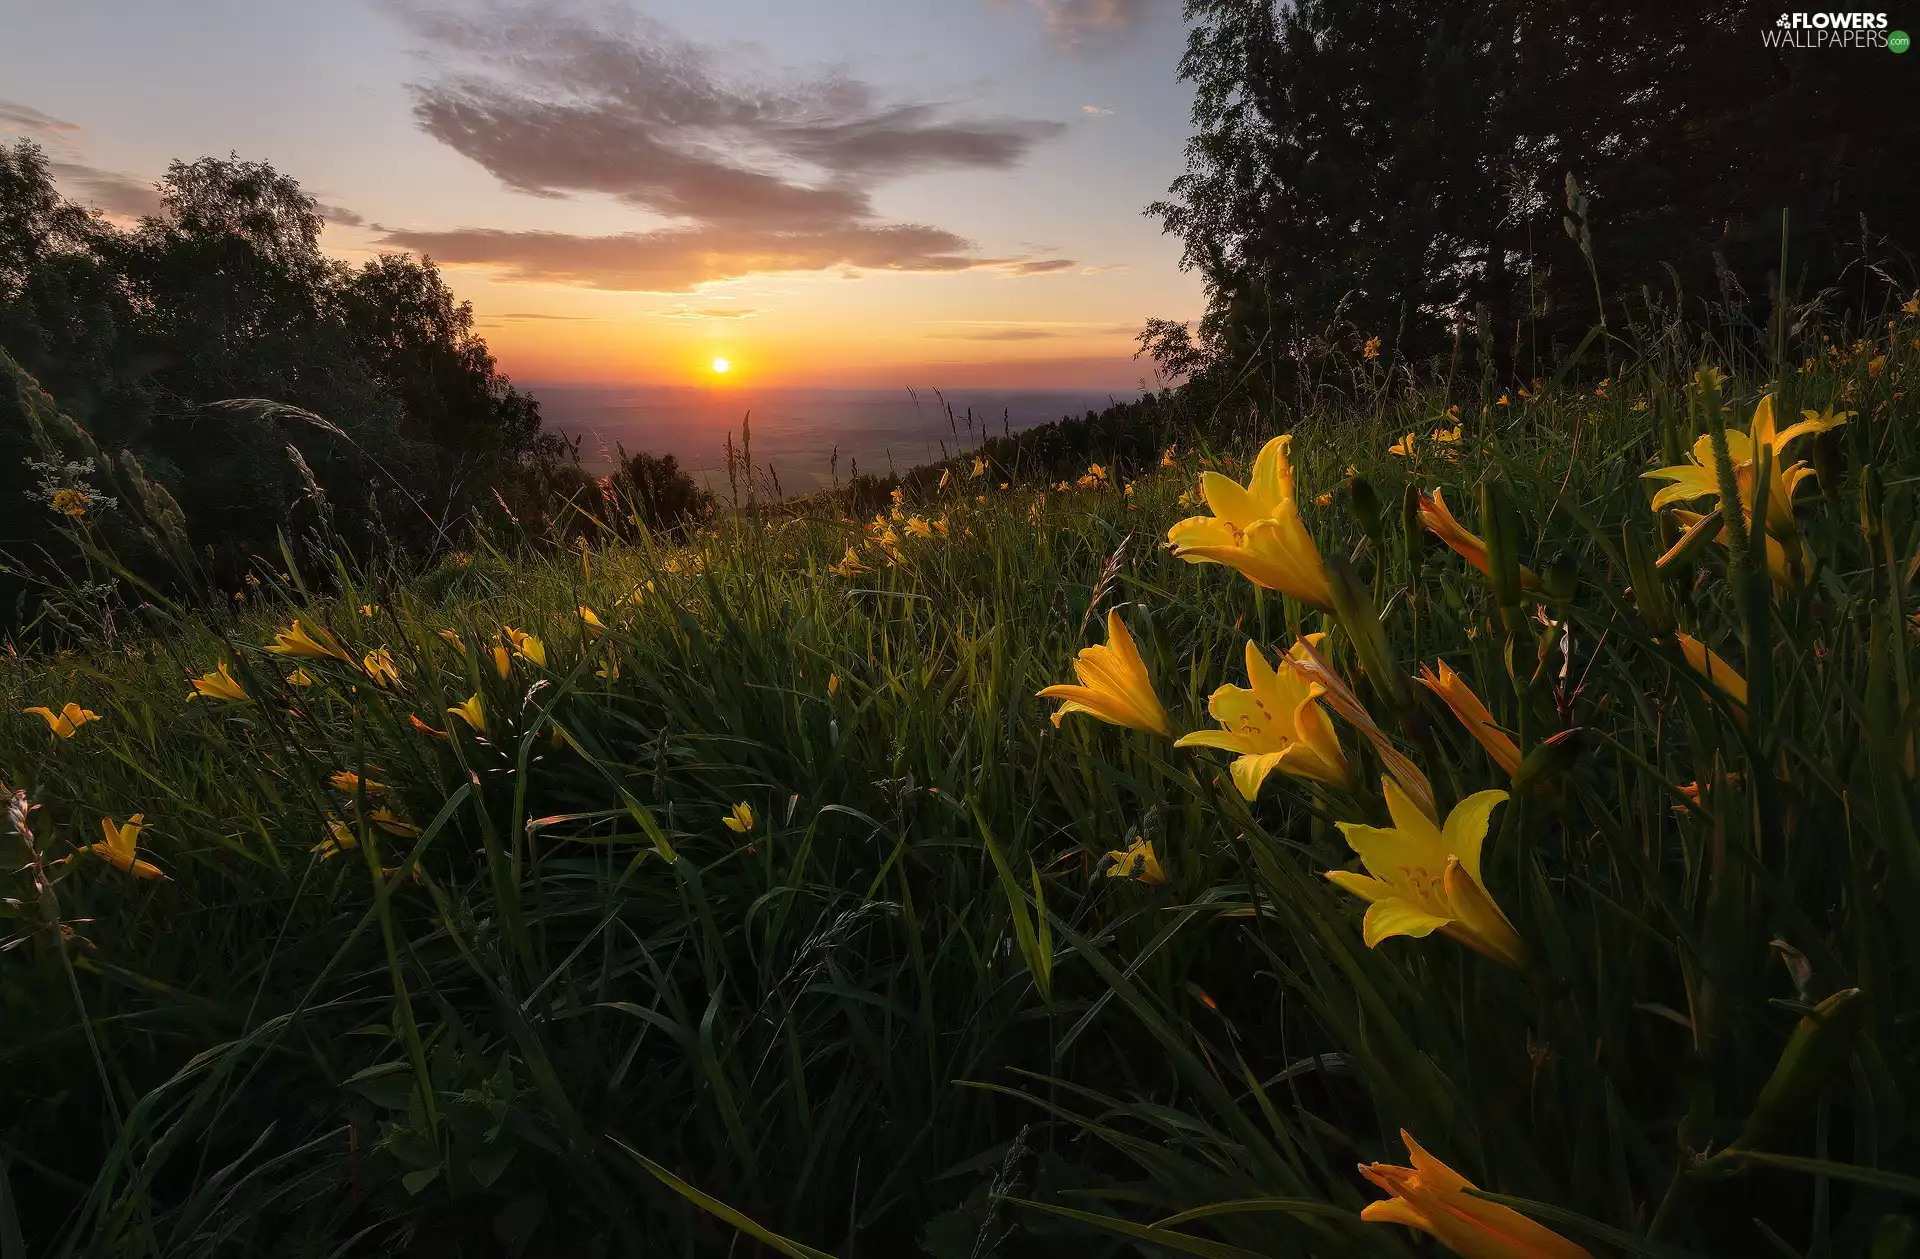 Hill, lilies, trees, grass, Flowers, Great Sunsets, viewes